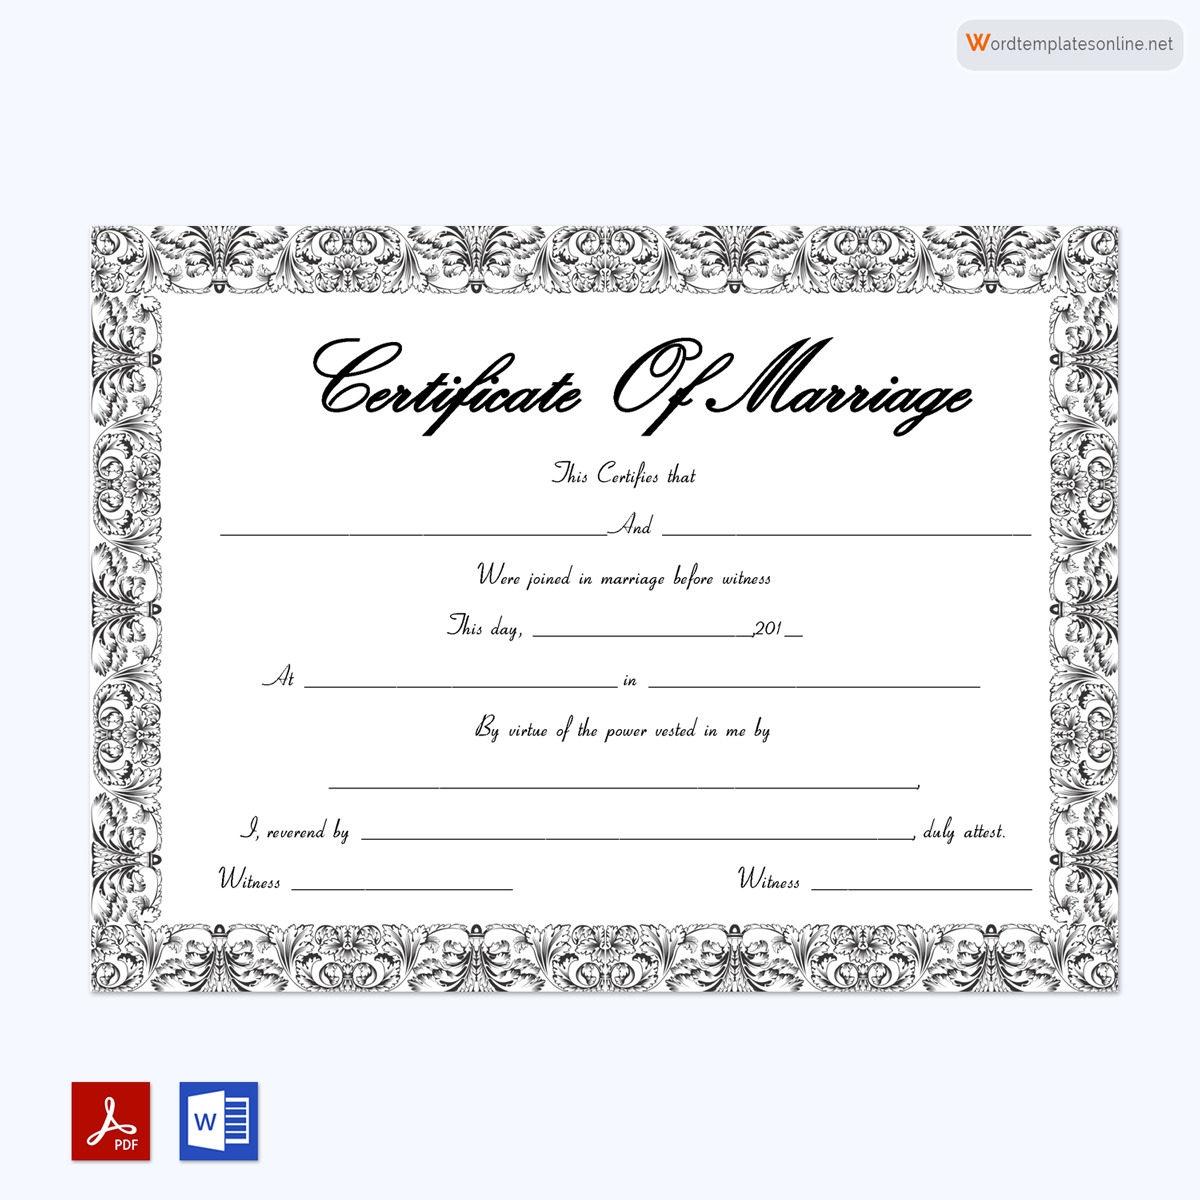 Official Marriage Certificate Sample